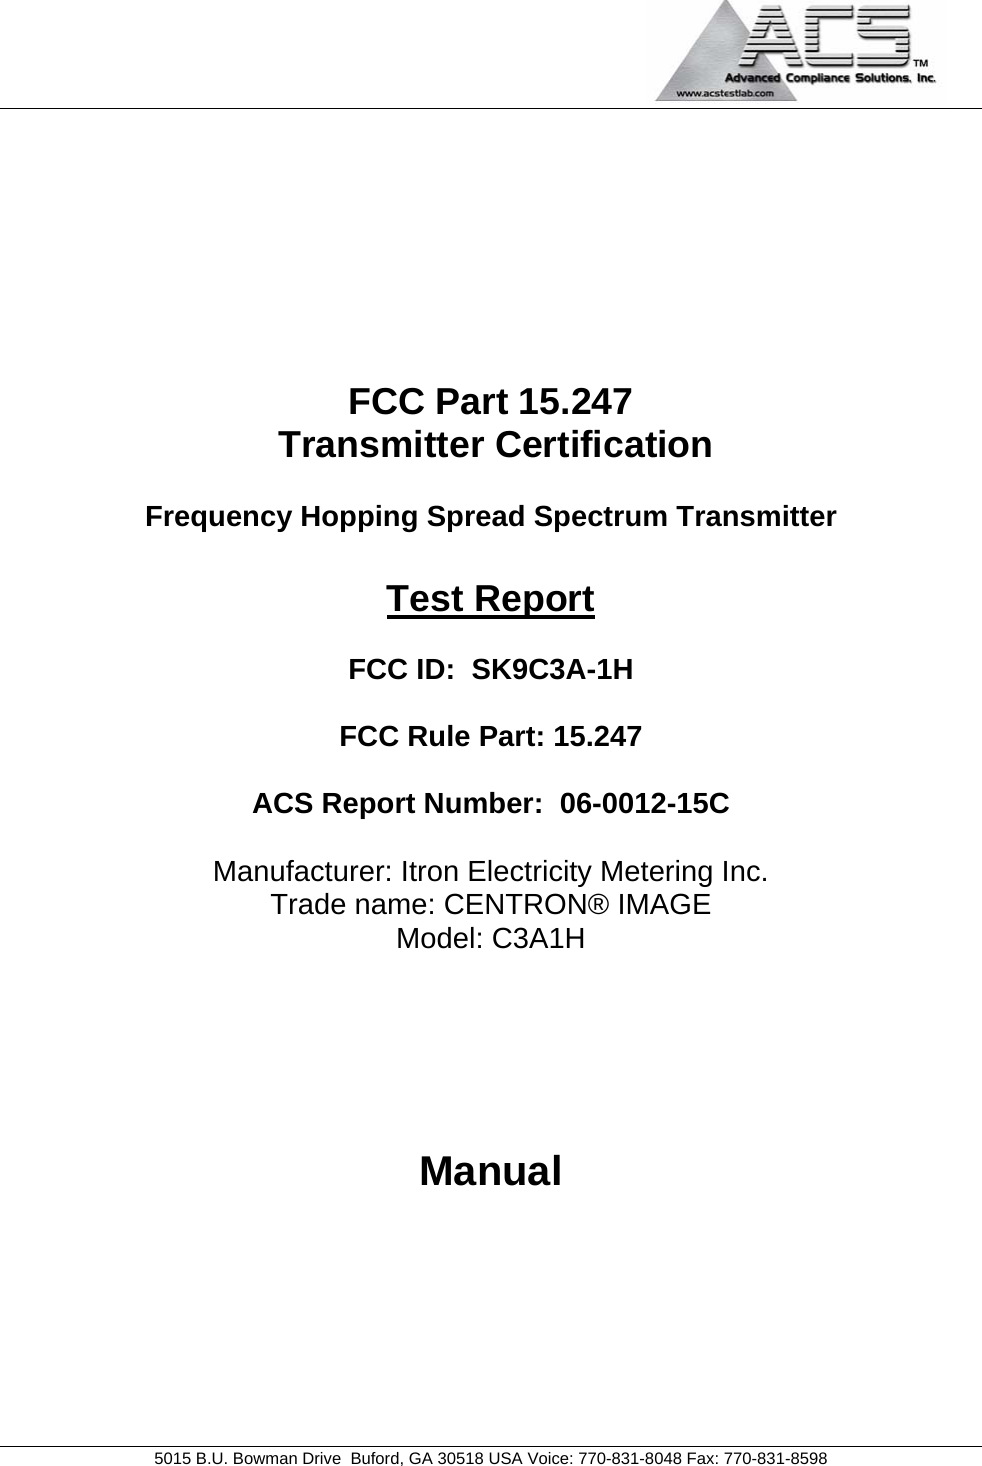                                             5015 B.U. Bowman Drive  Buford, GA 30518 USA Voice: 770-831-8048 Fax: 770-831-8598        FCC Part 15.247  Transmitter Certification  Frequency Hopping Spread Spectrum Transmitter  Test Report  FCC ID:  SK9C3A-1H  FCC Rule Part: 15.247  ACS Report Number:  06-0012-15C   Manufacturer: Itron Electricity Metering Inc. Trade name: CENTRON® IMAGE Model: C3A1H     Manual     